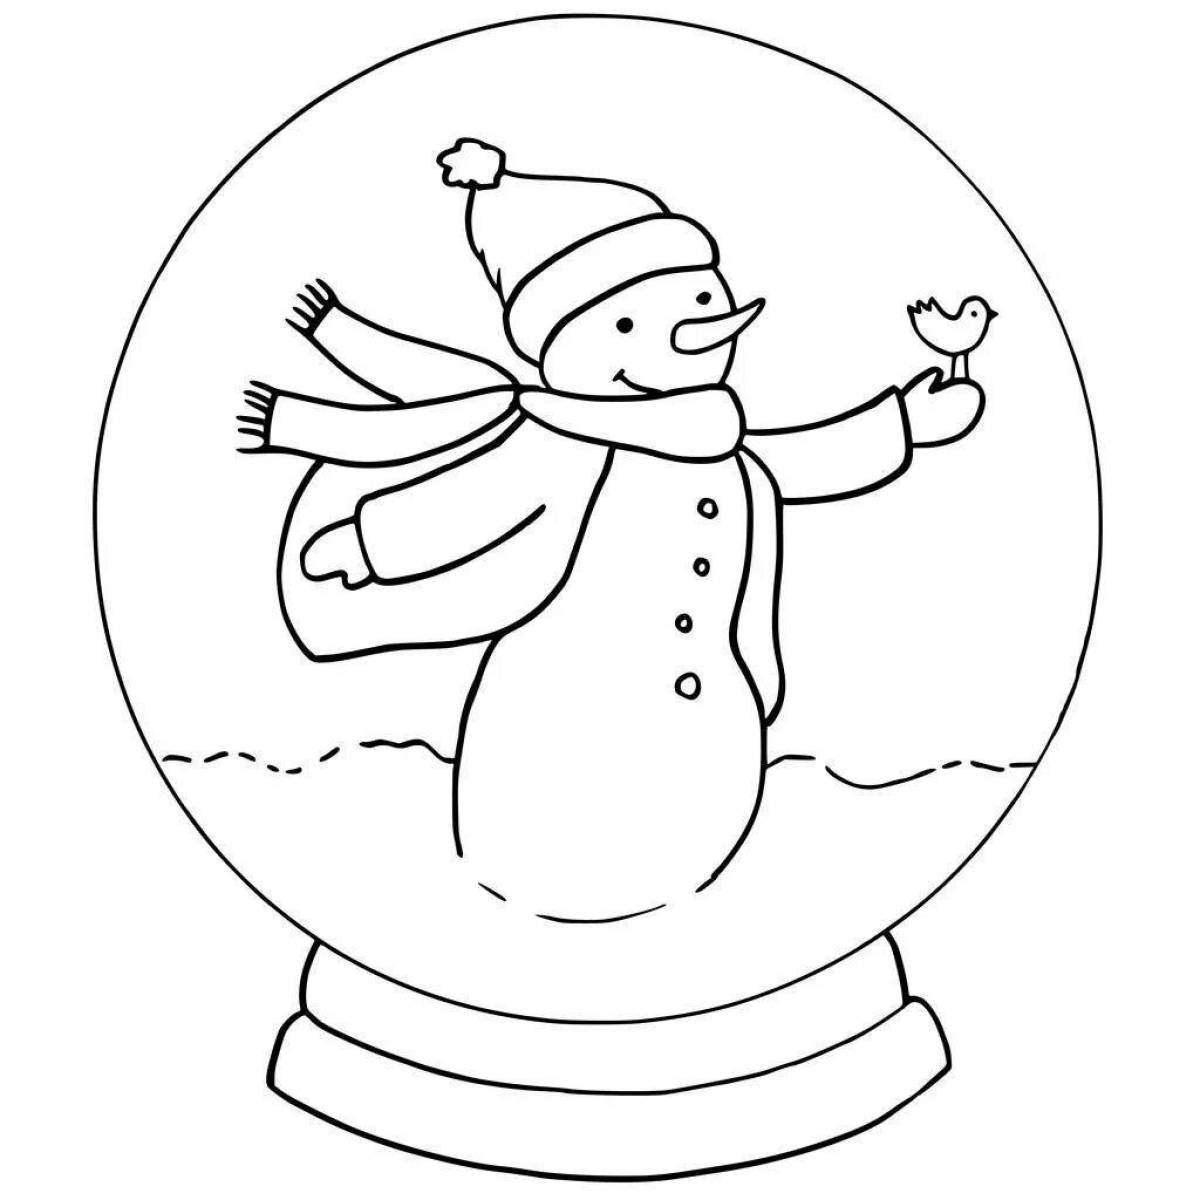 Coloring page cheerful winter ball